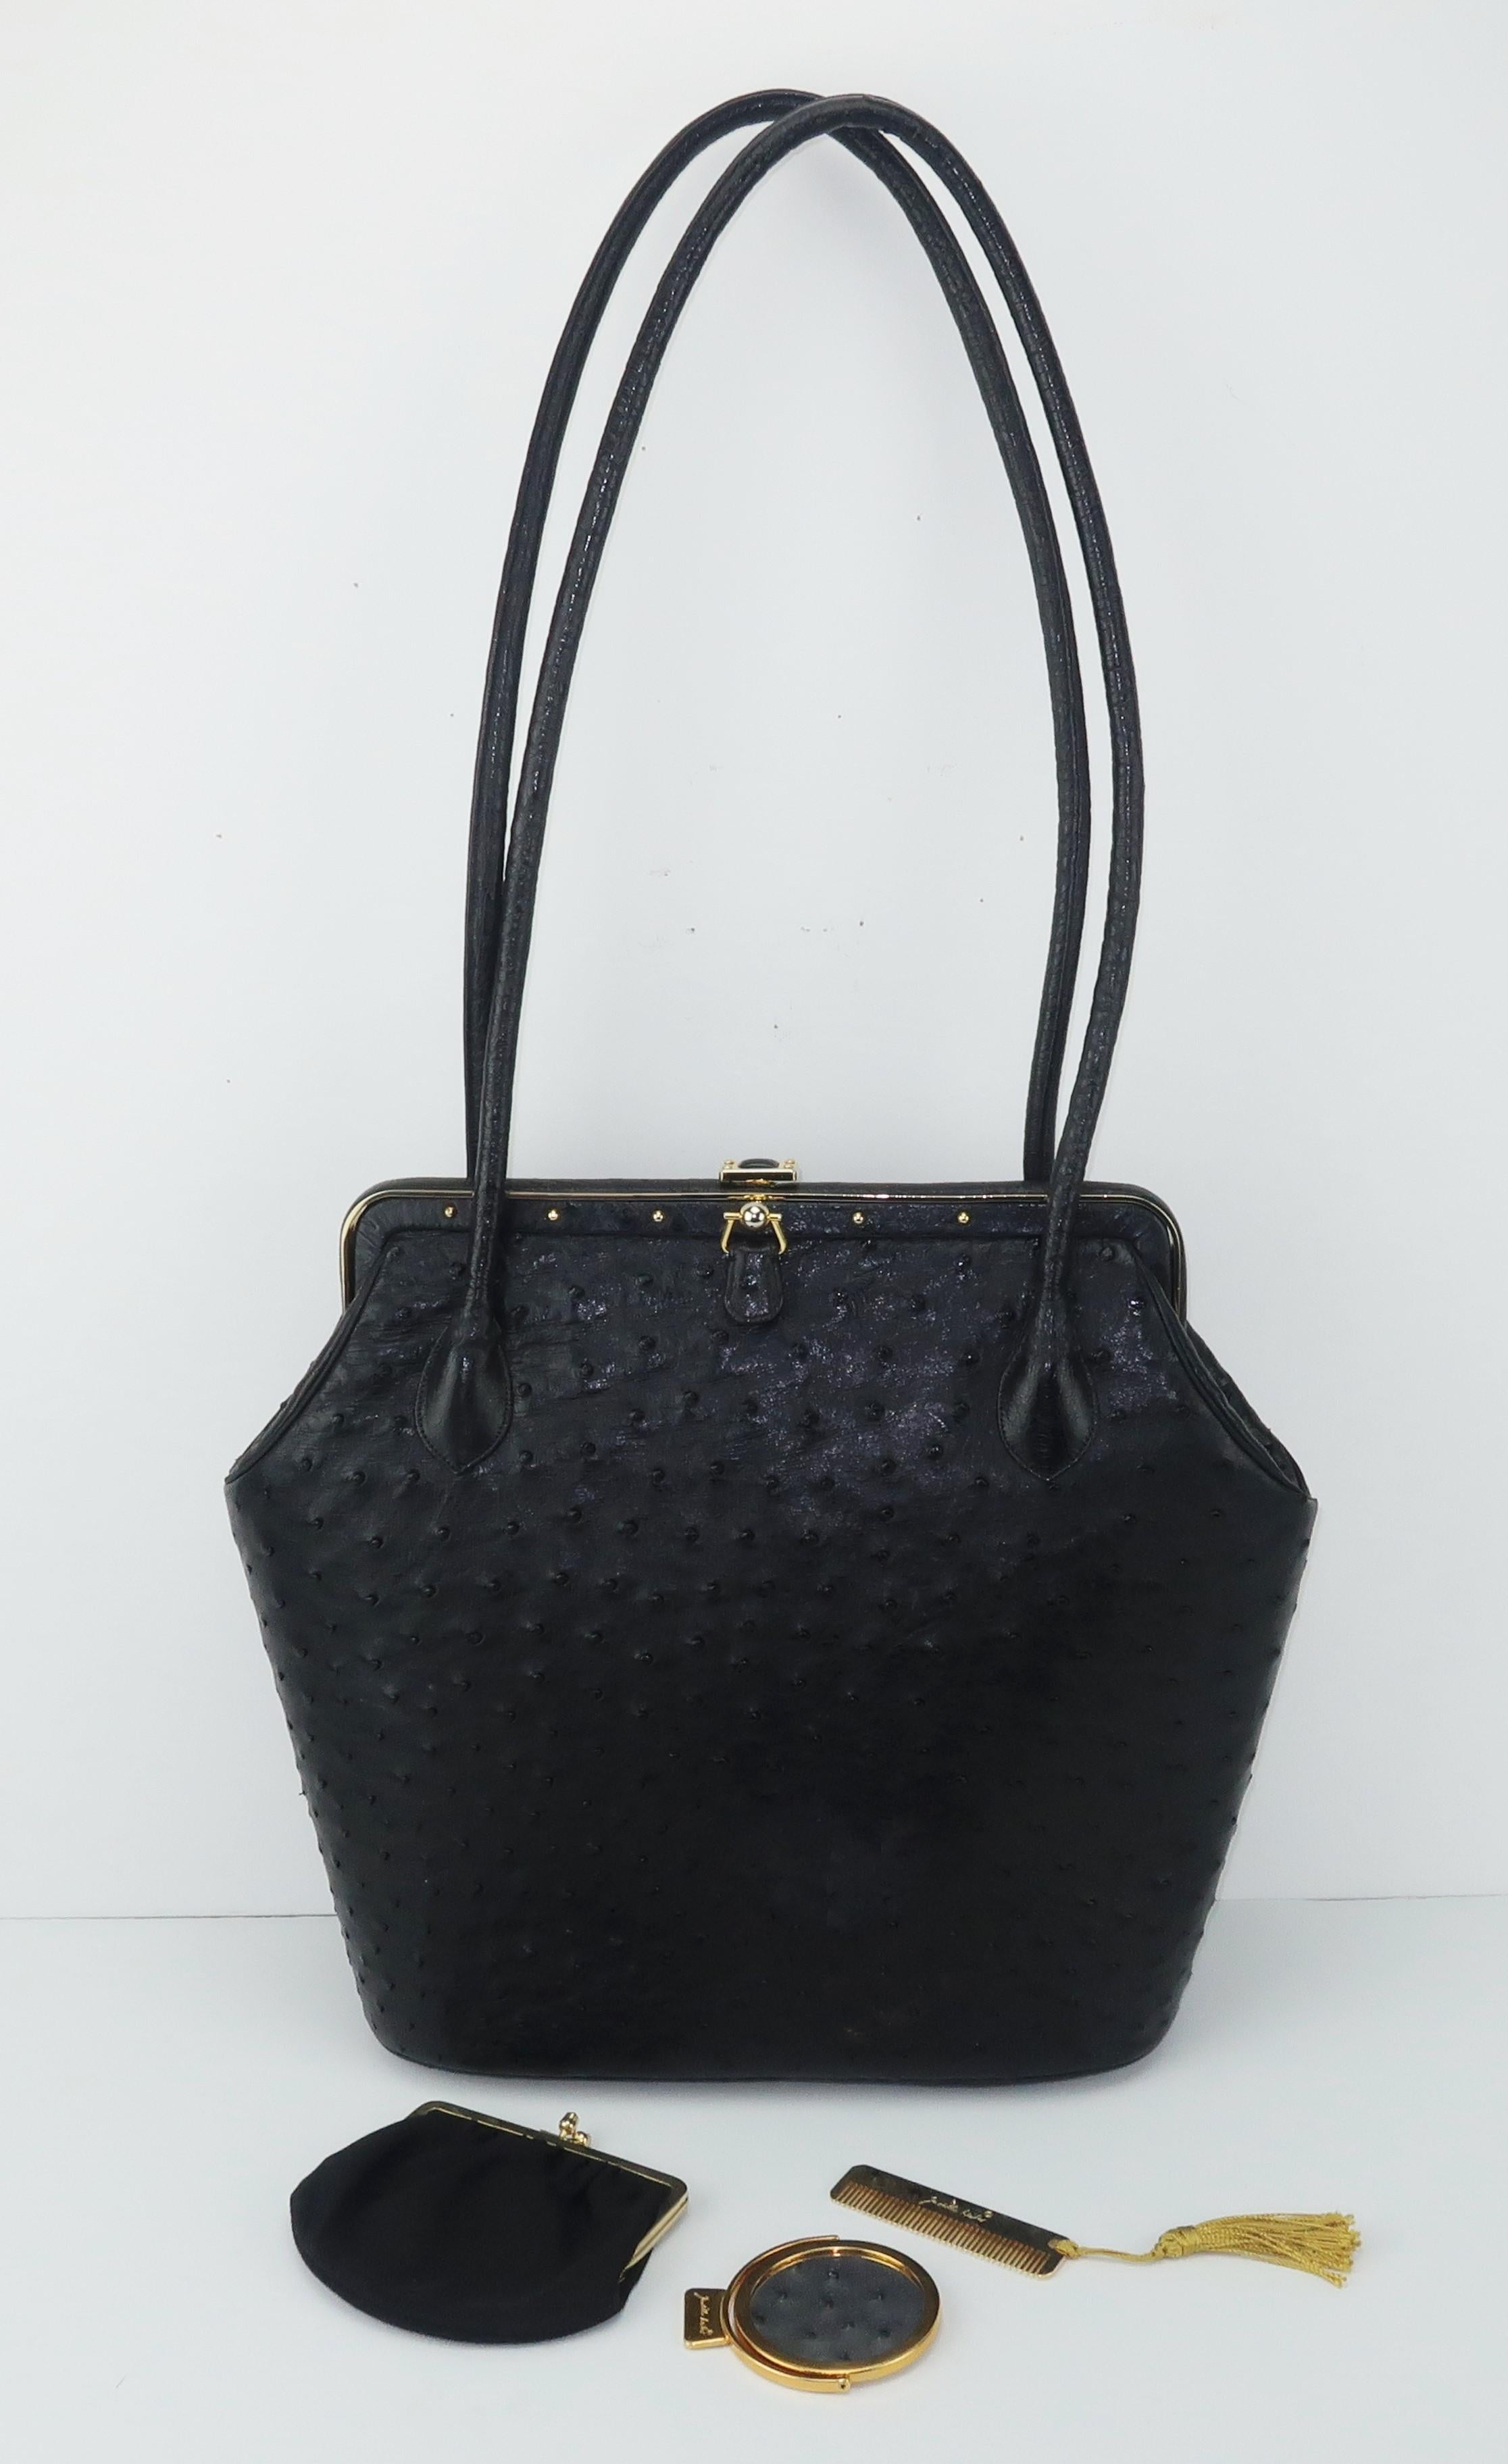 Judith Leiber Large Black Ostrich Leather Handbag With Gold Studs In Good Condition For Sale In Atlanta, GA